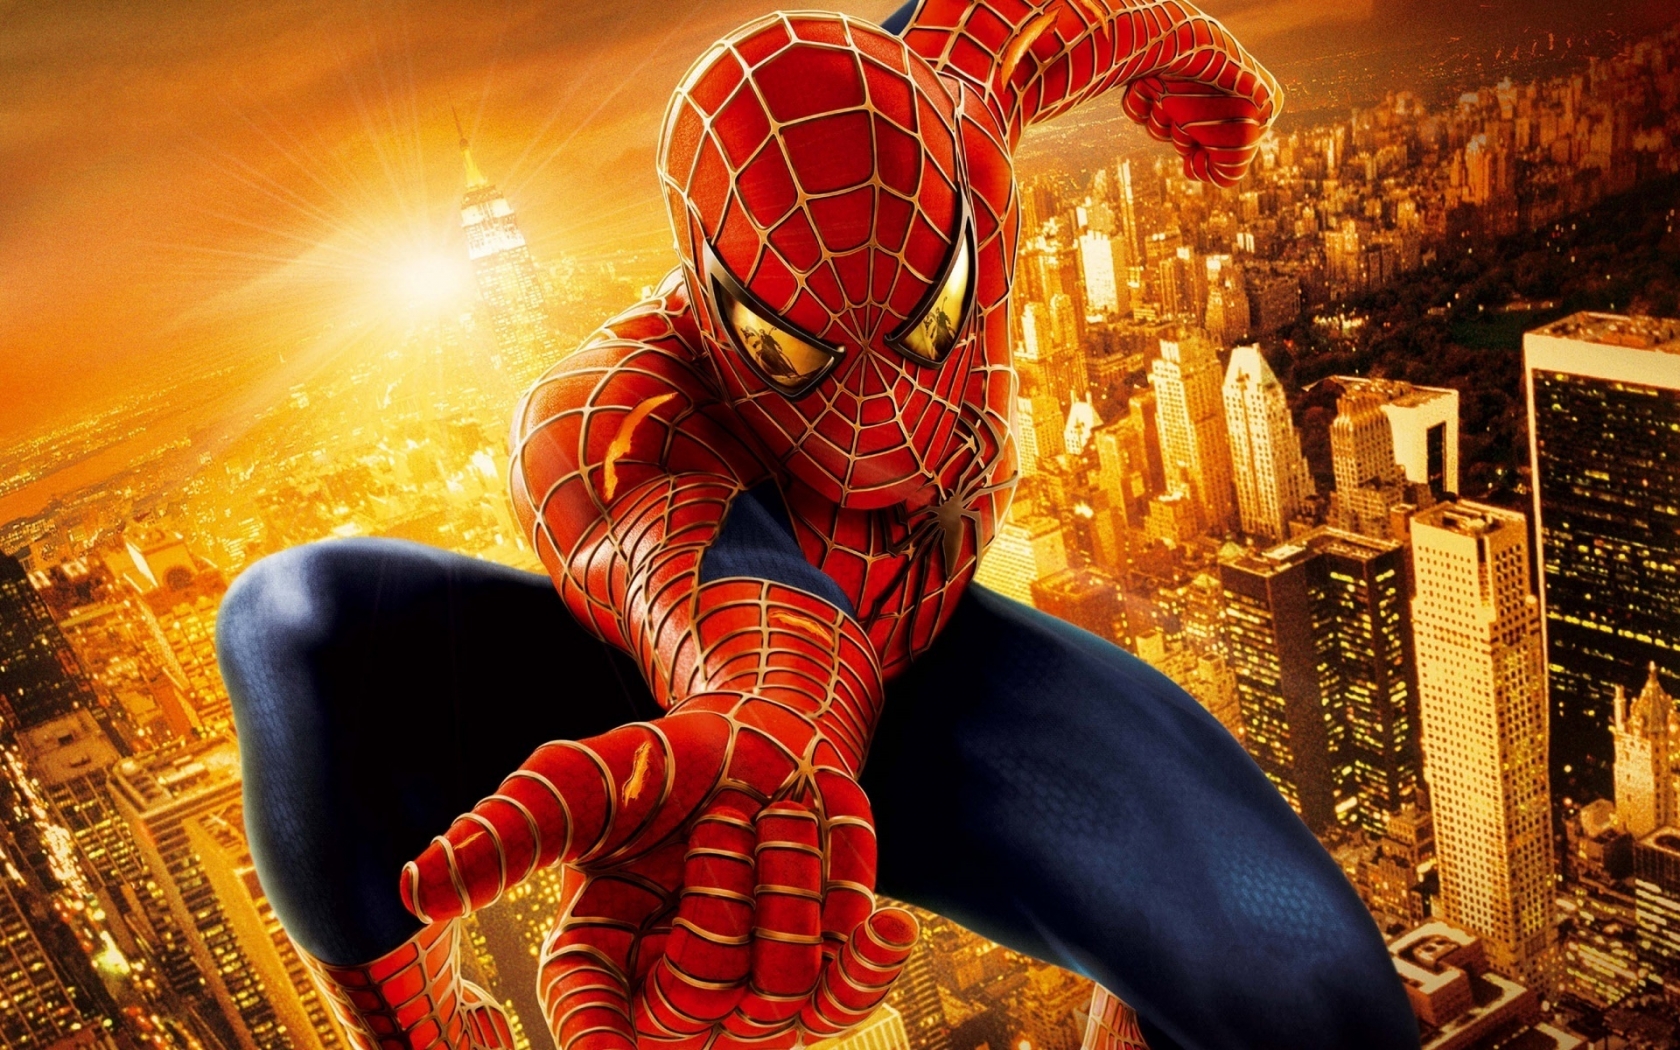 Spiderman Up for 1680 x 1050 widescreen resolution